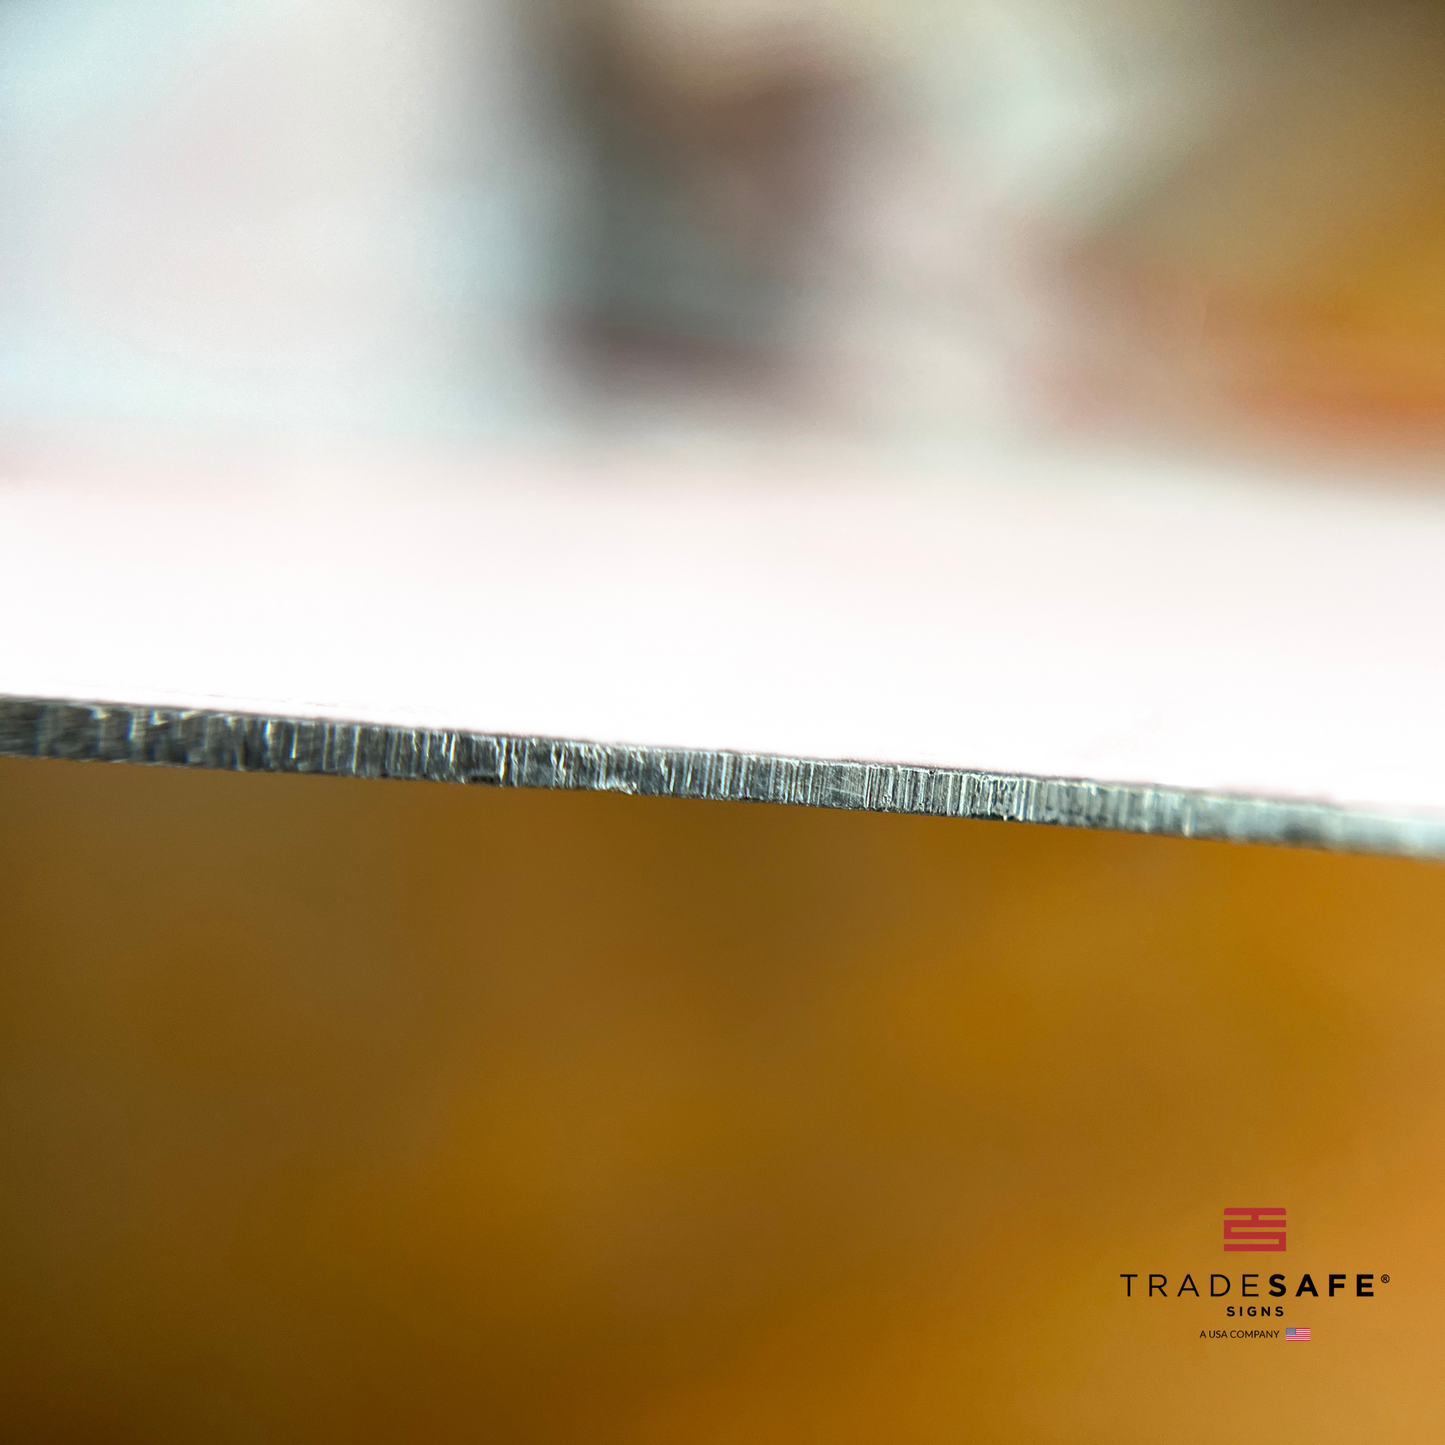 thickness of tradesafe's sign